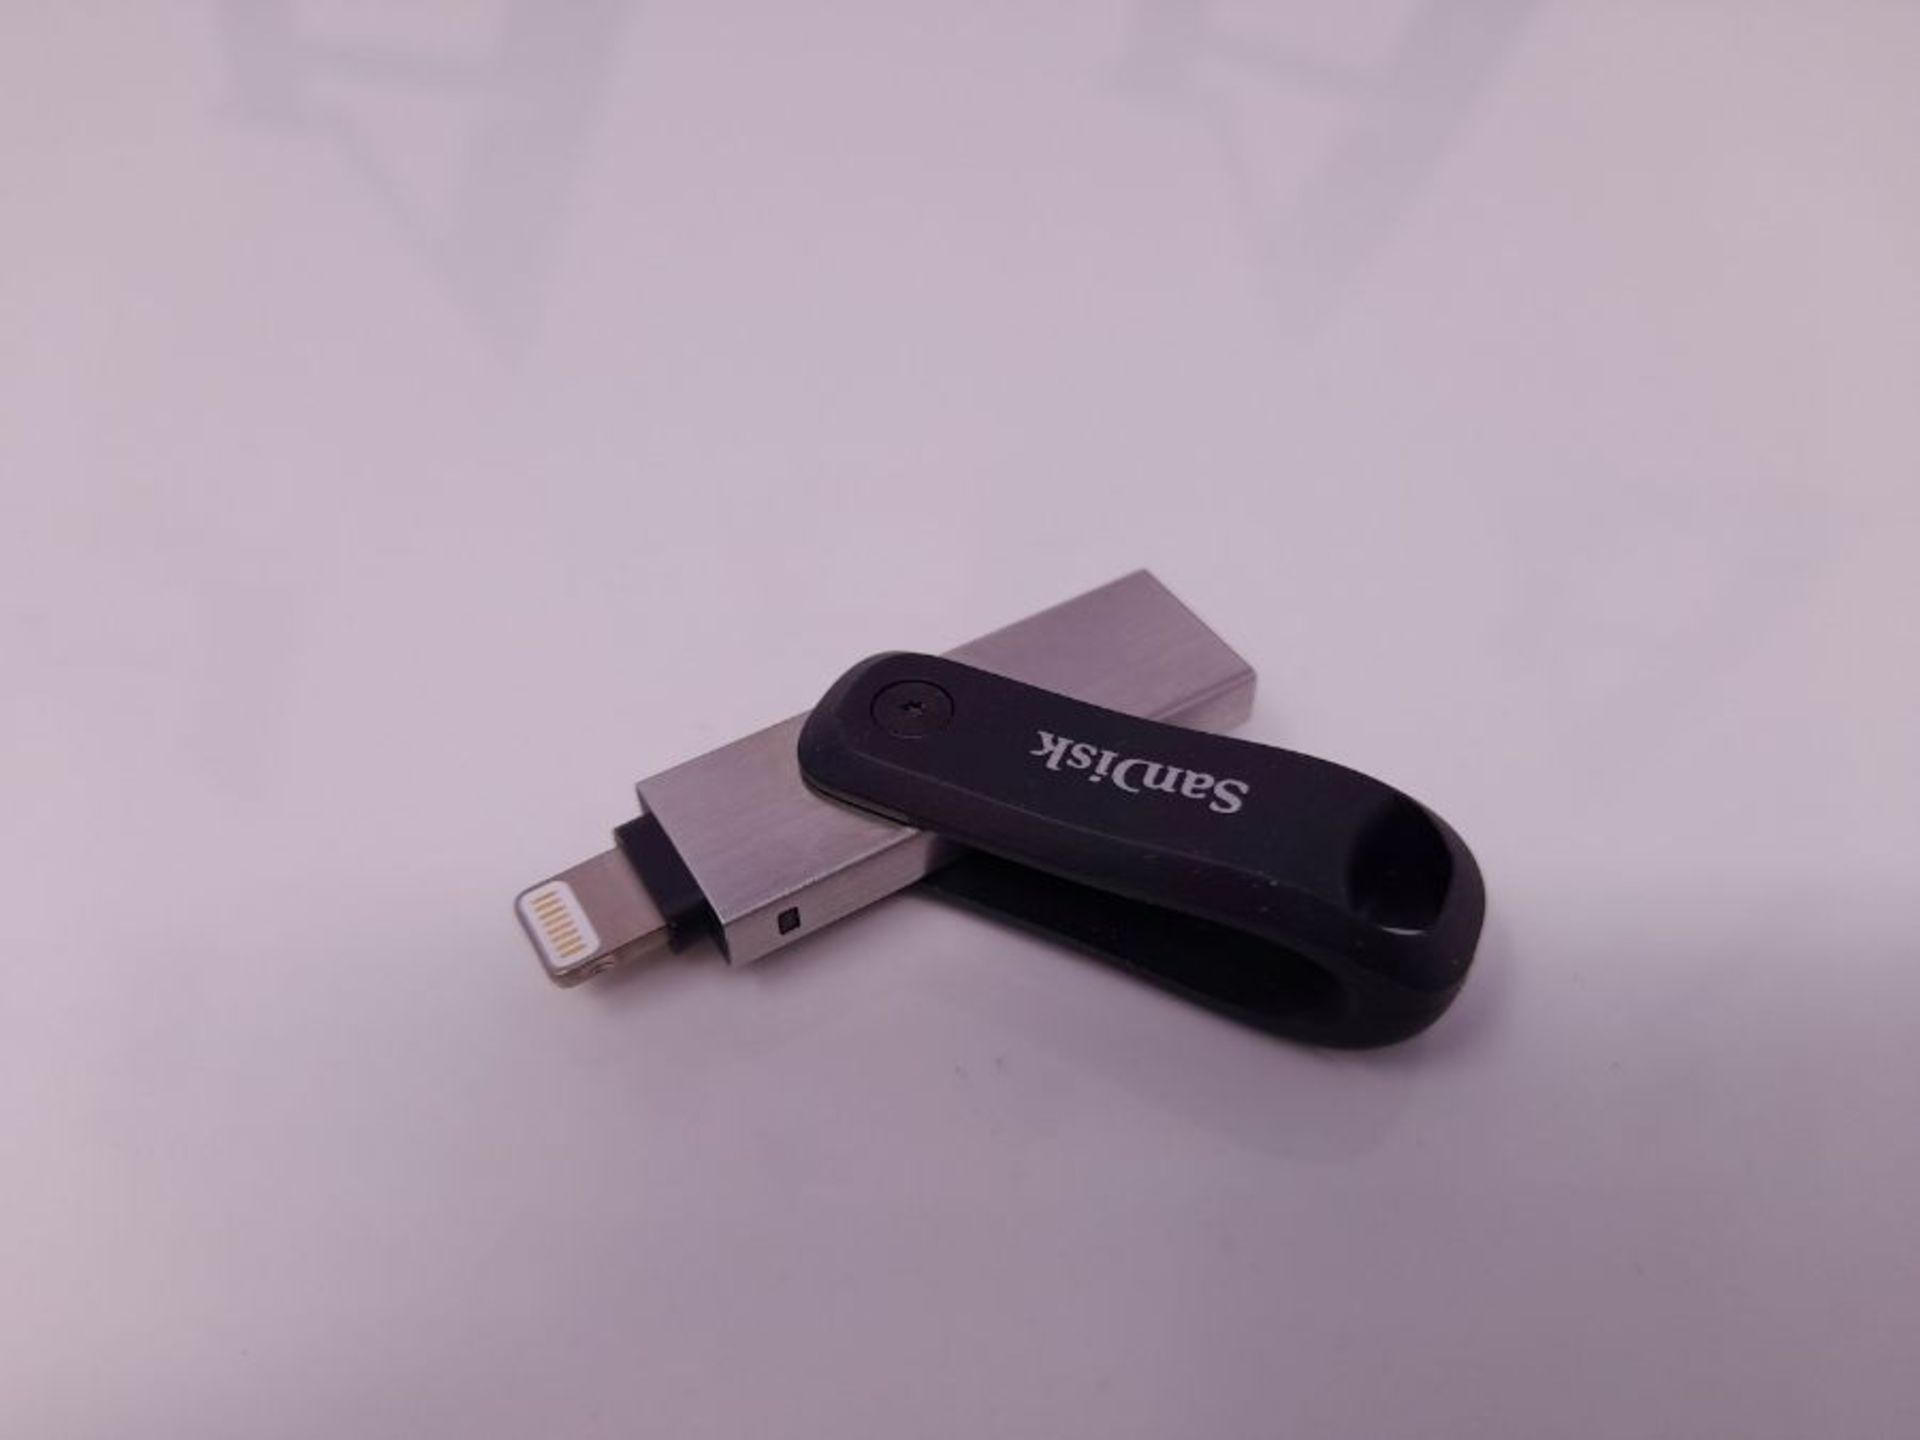 RRP £51.00 SanDisk 128GB iXpand USB Flash Drive Go for your iPhone and iPad - Image 2 of 3